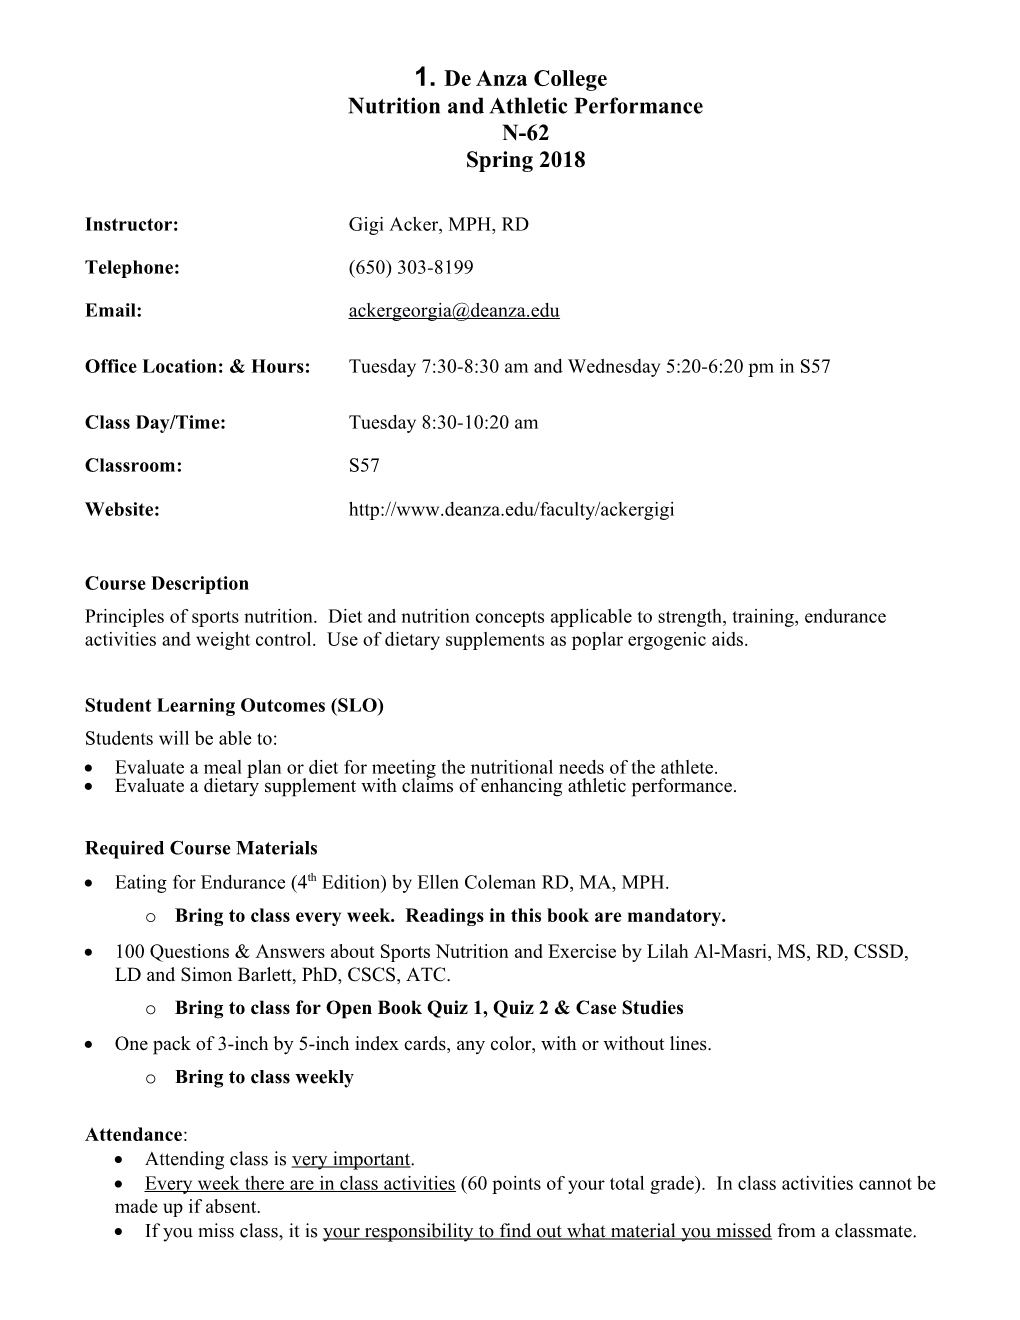 Accessible Syllabus Template s11